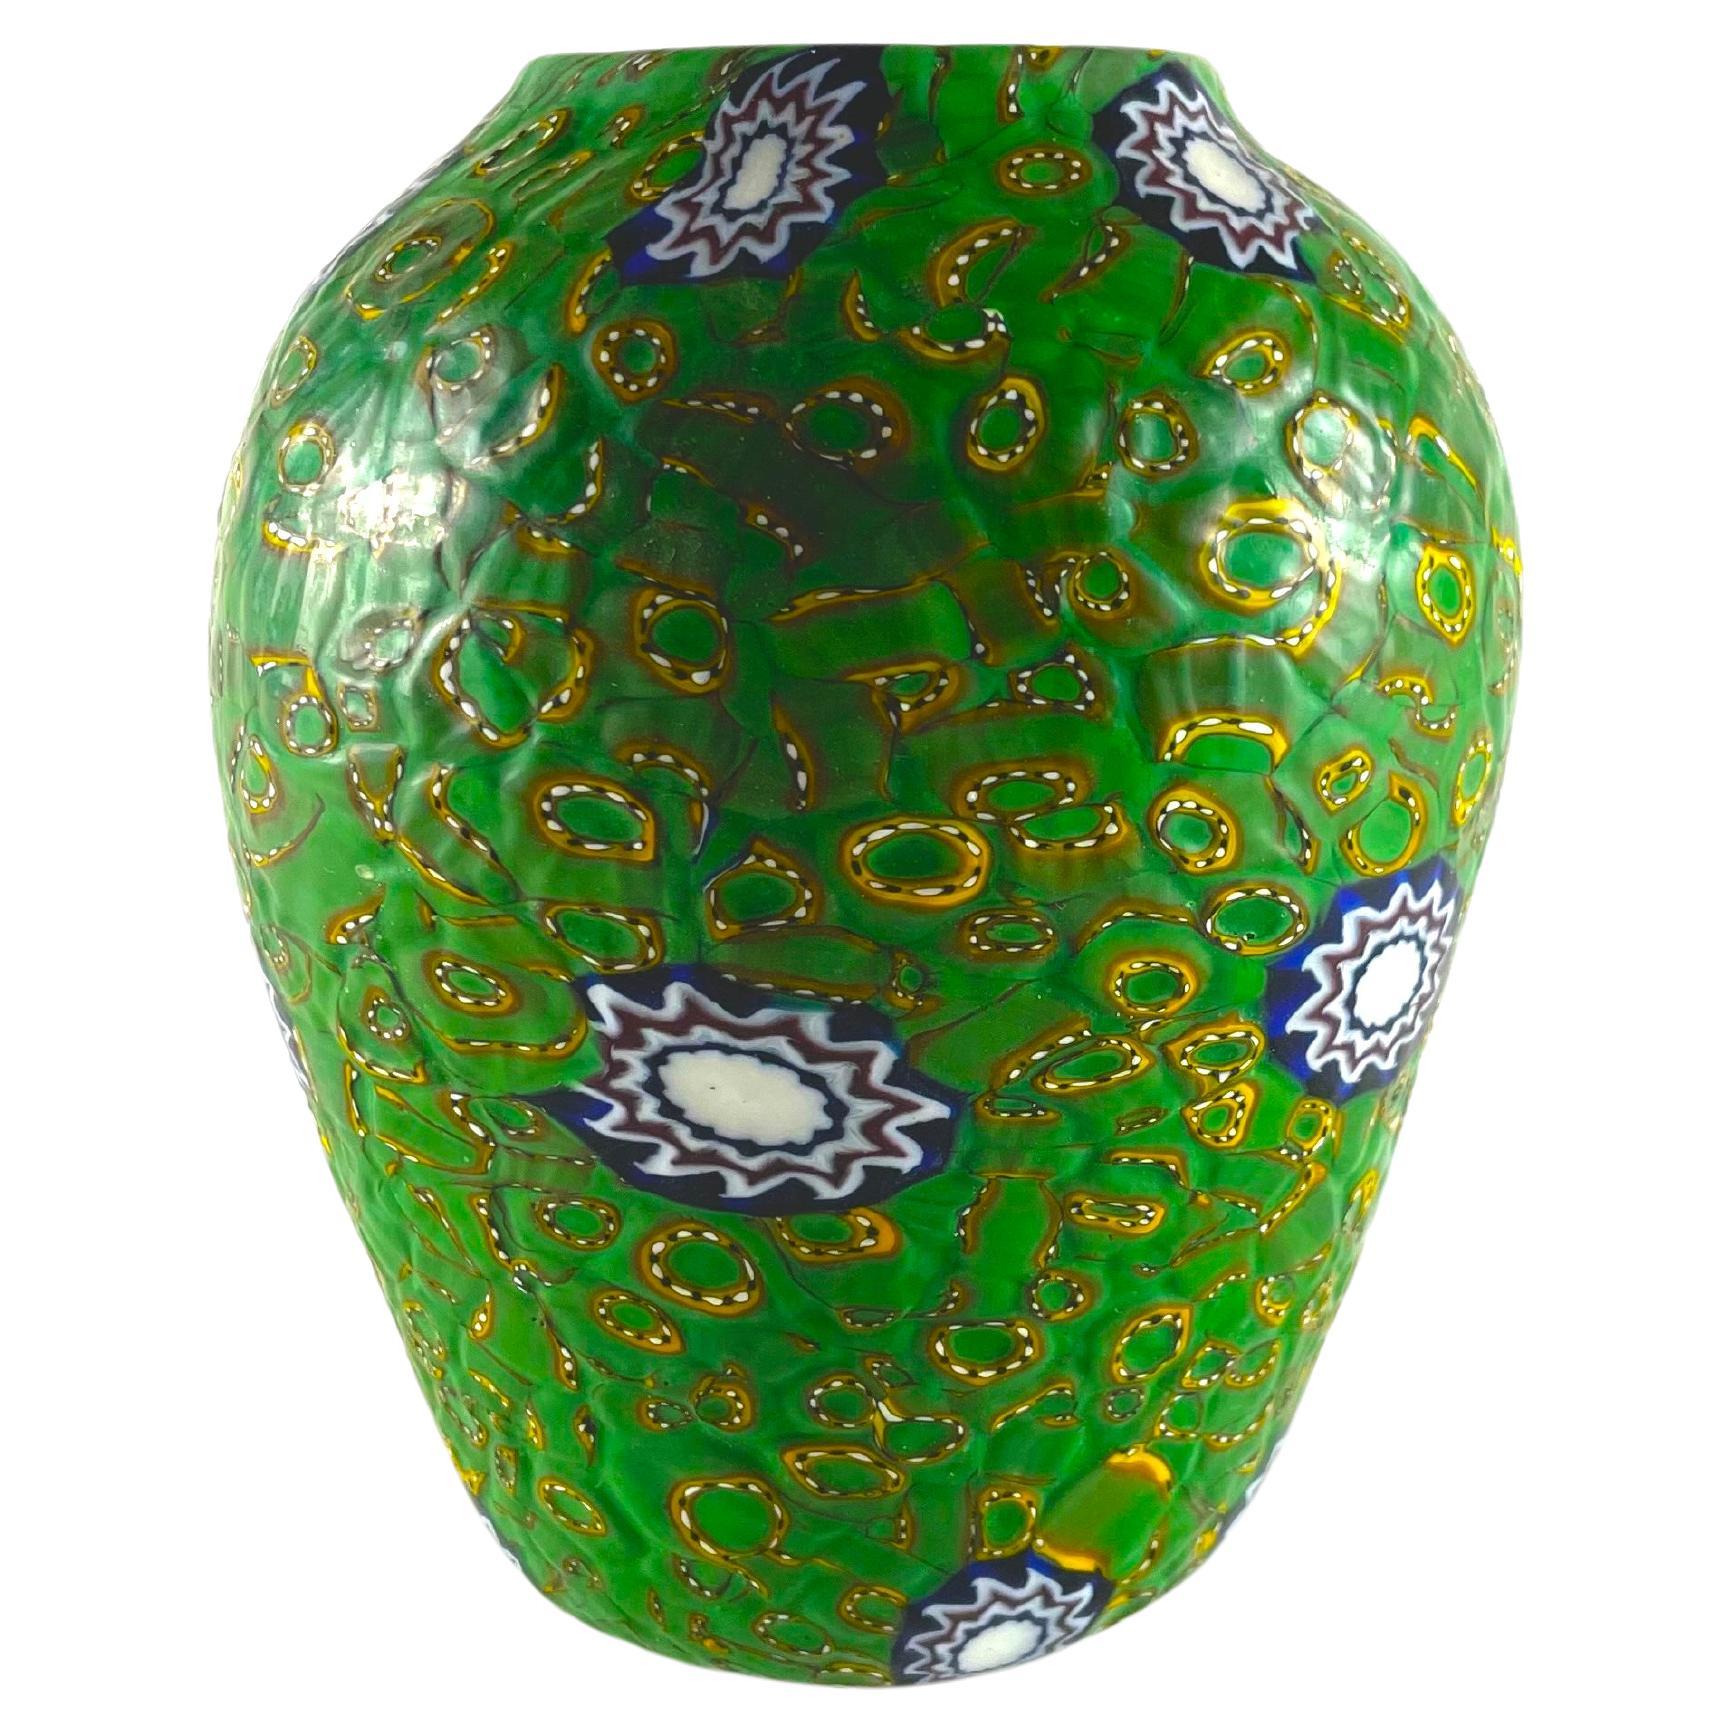 ROSETA murrina, with green and gold, by FRATELLI TOSO MURANO, 1950 circa